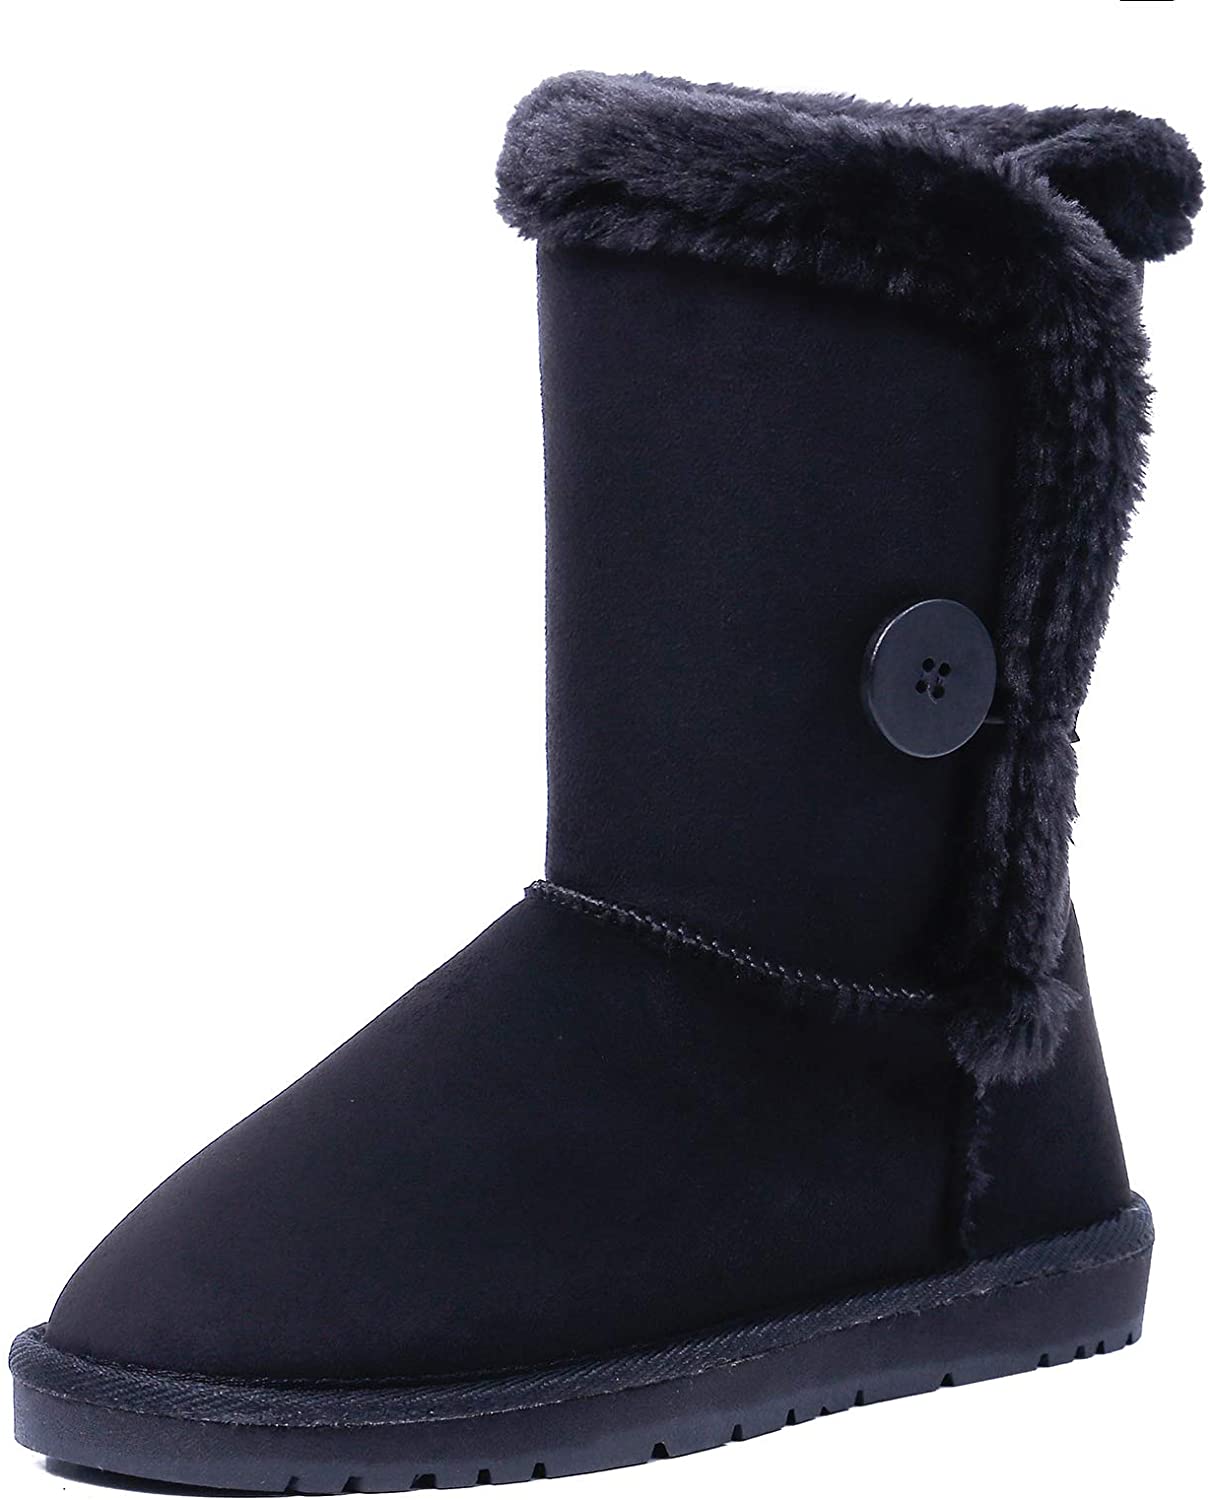 WFL Women's Snow Boots Mid Calf Fur Lining Winter Classic Boots